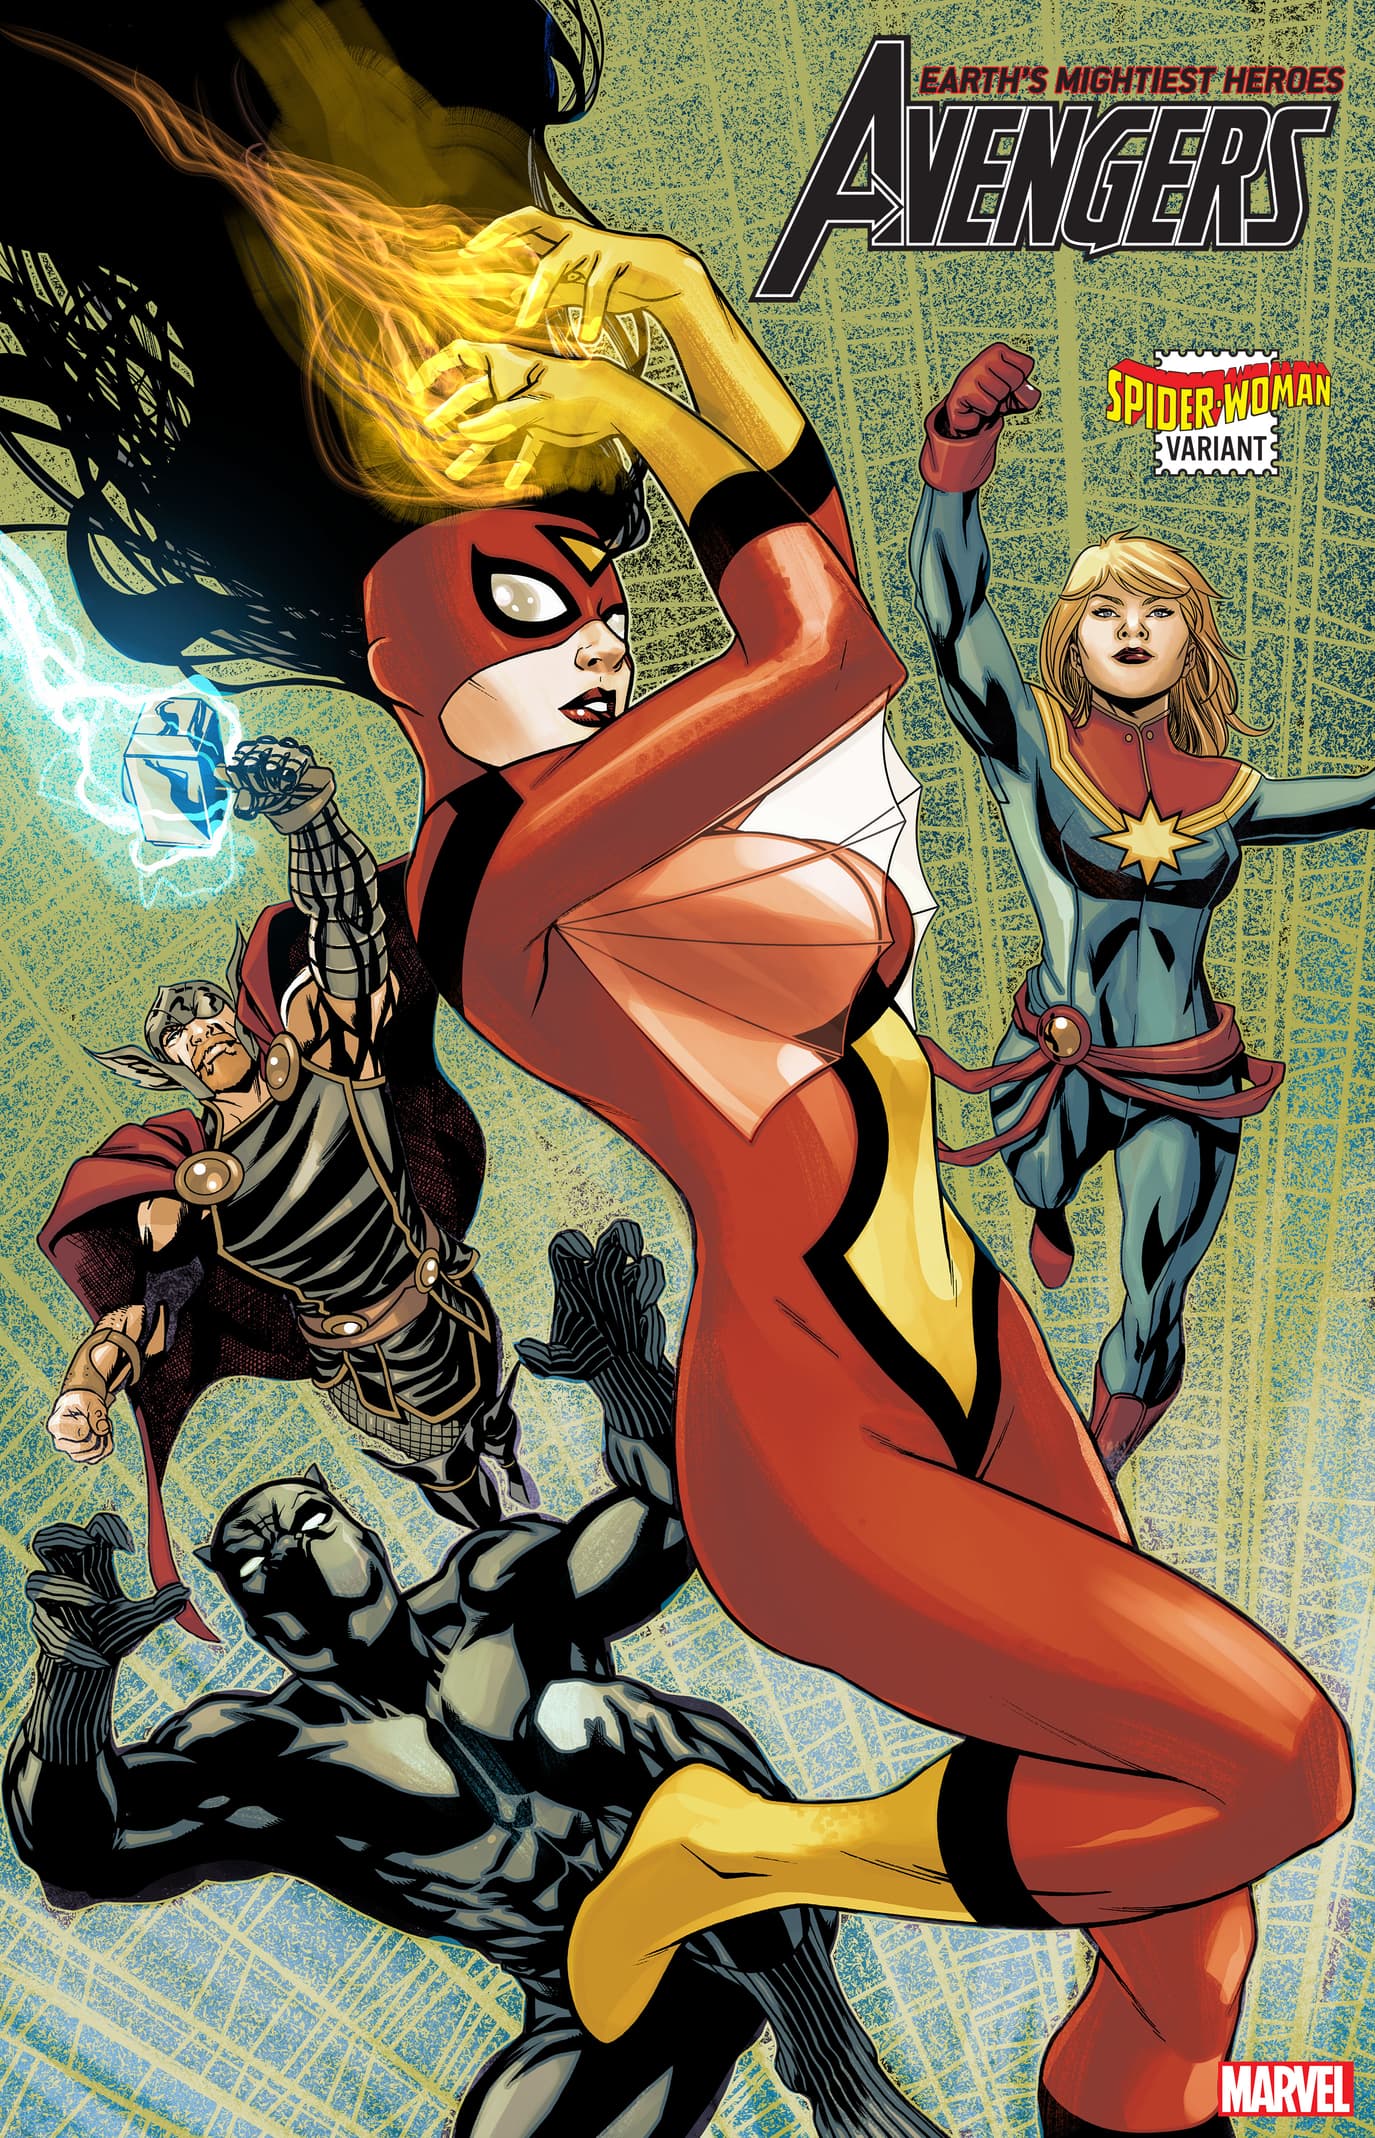 AVENGERS #32 SPIDER-WOMAN VARIANT by MIKE McKONE with colors by ANDRES MOSSA